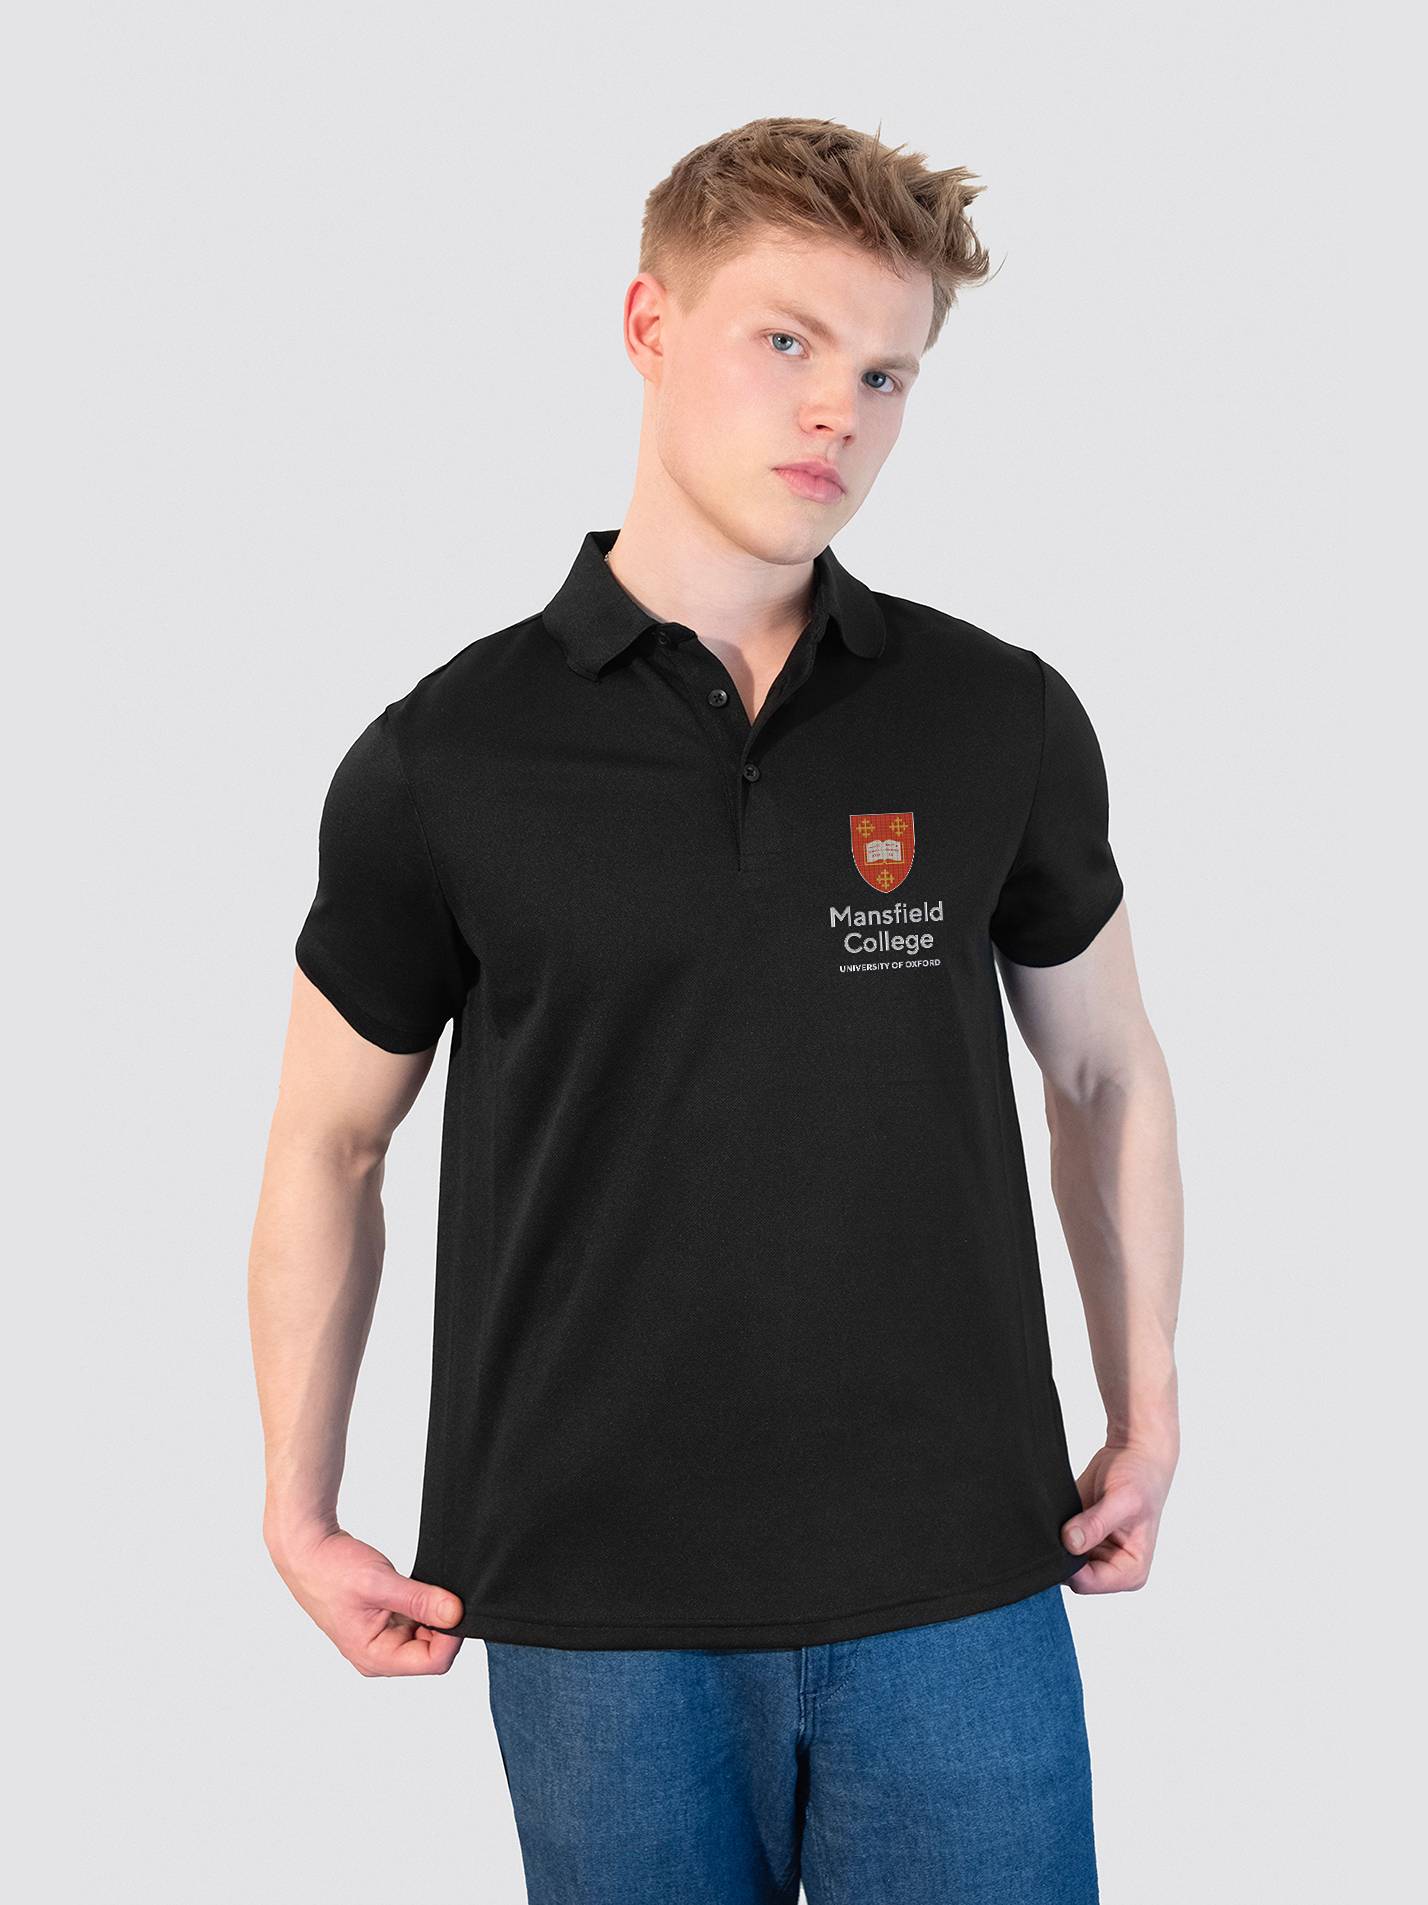 Mansfield College Oxford Sustainable Men's Polo Shirt